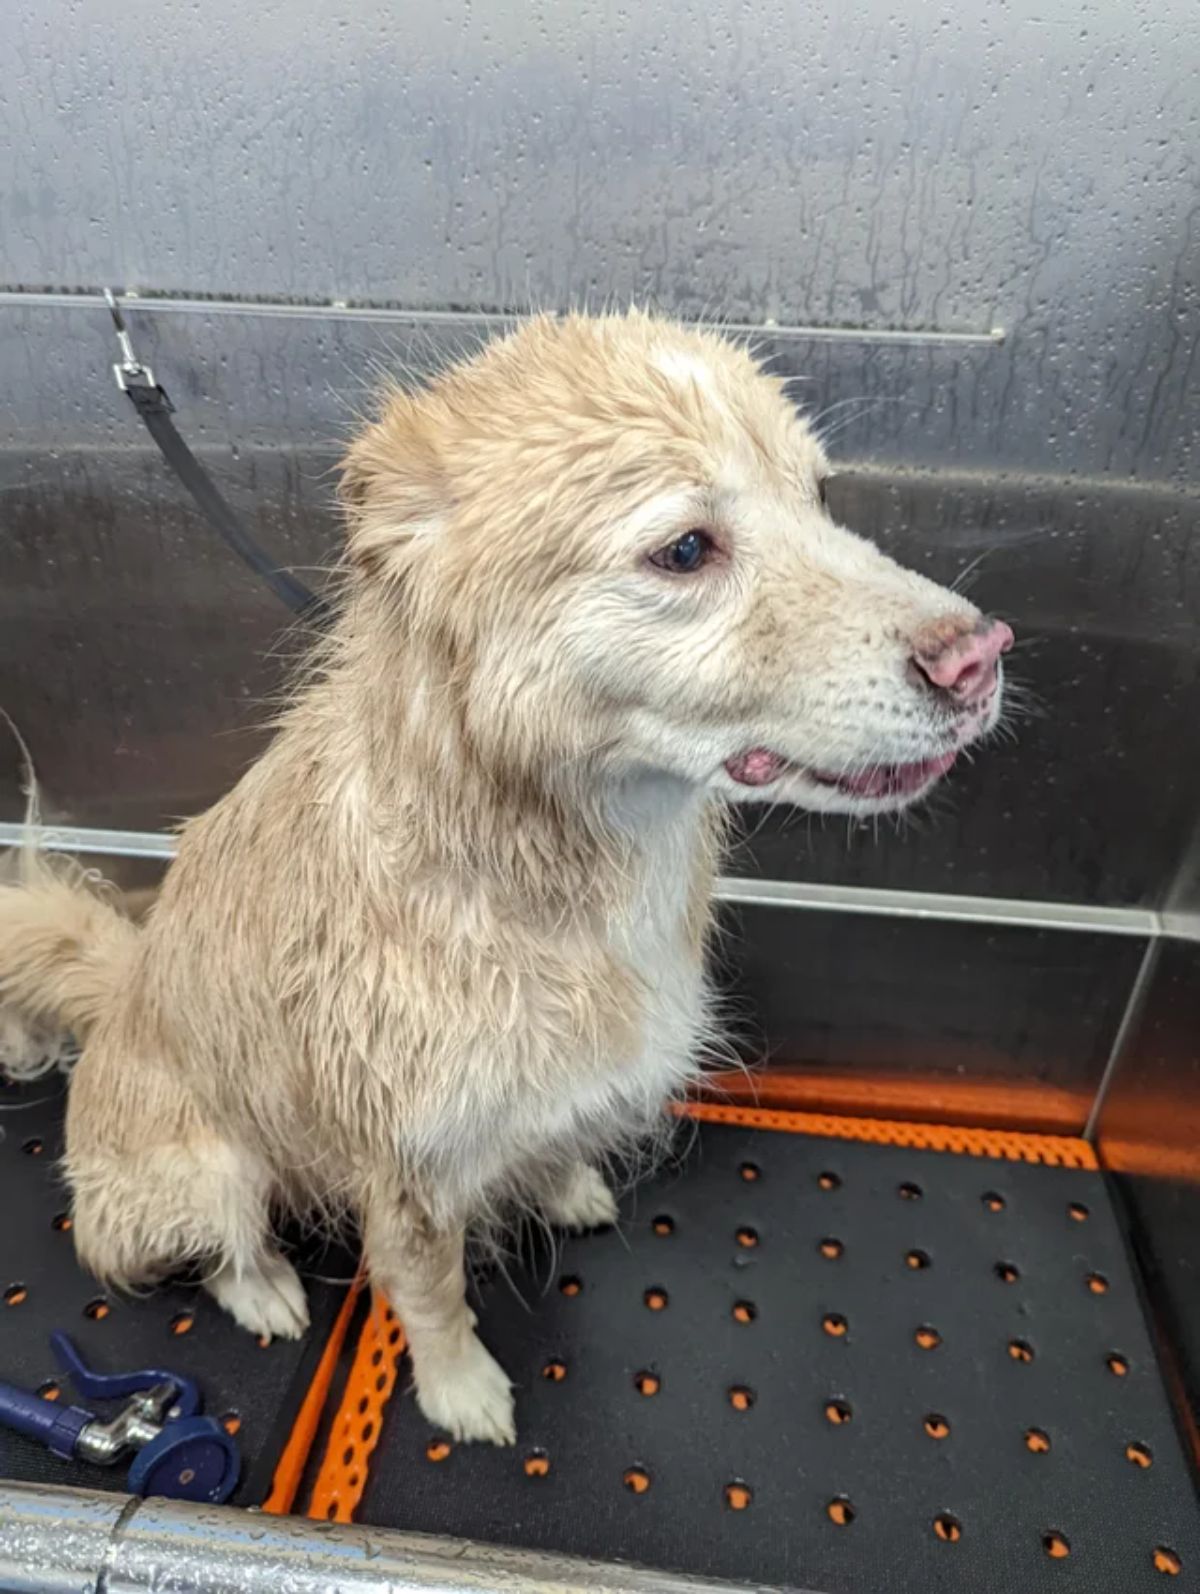 wet brown and white dog sitting on a black and red surface at a groomer's